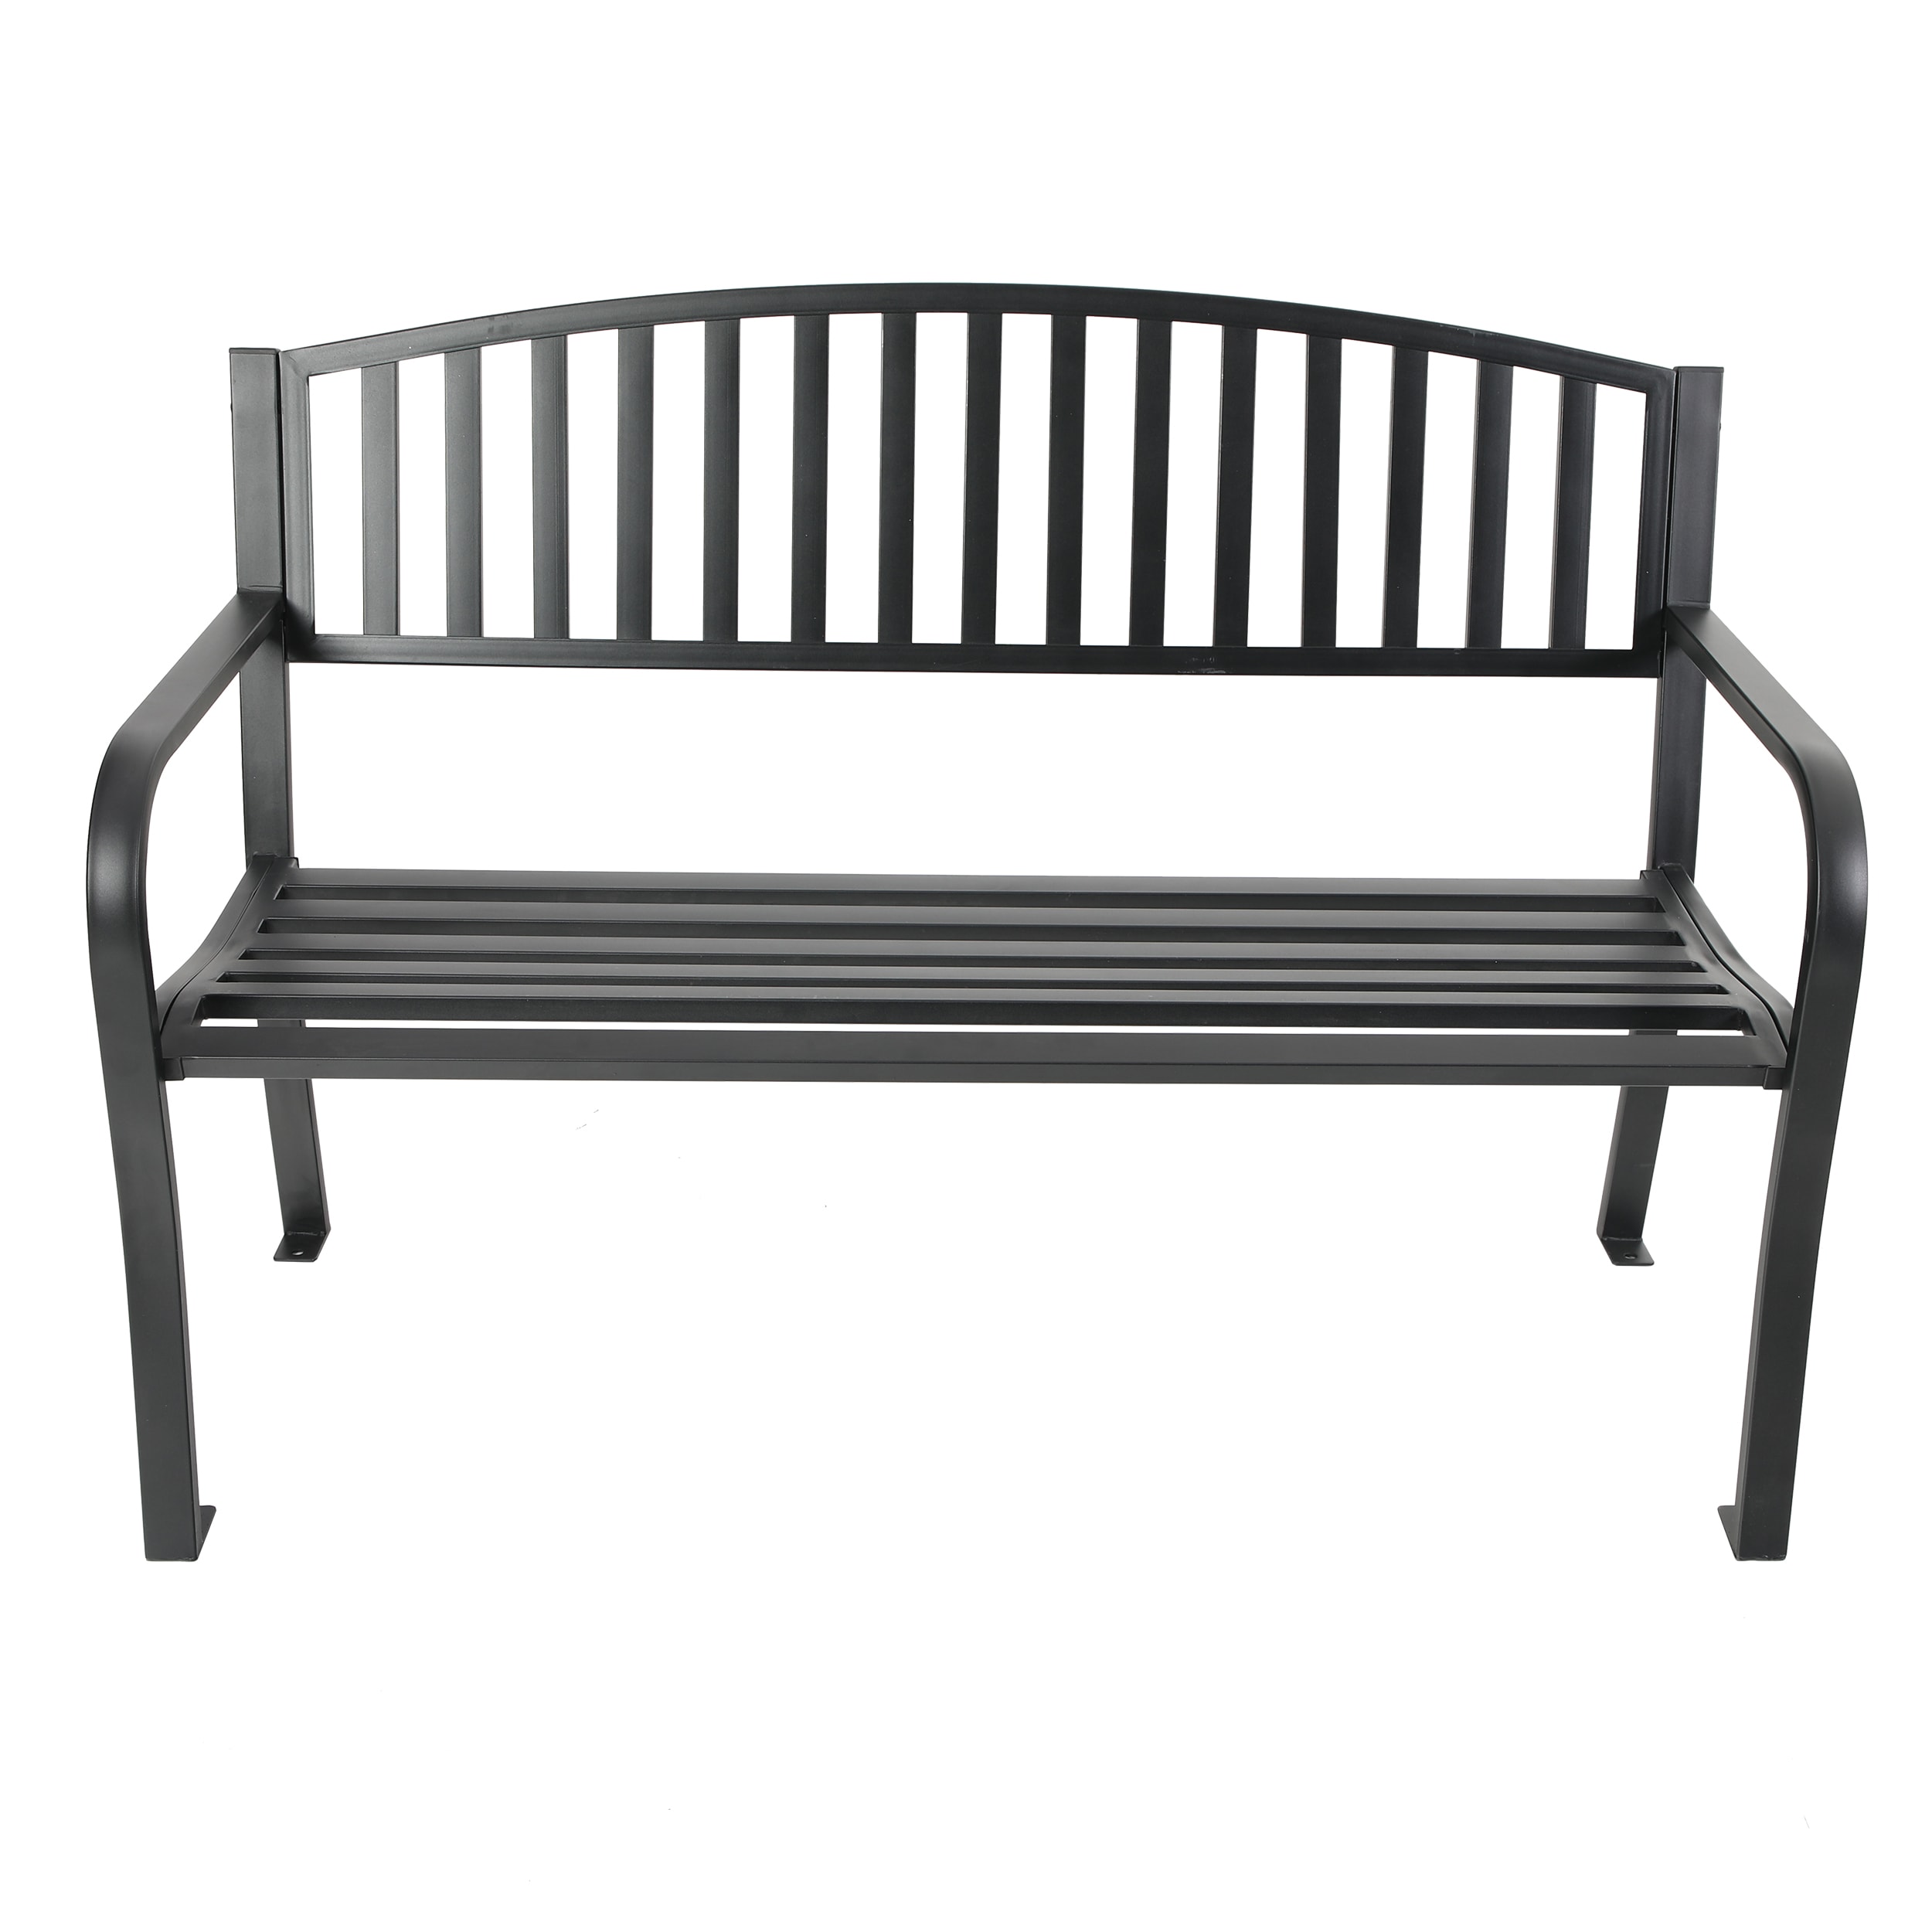 Black Outdoor Benches Weatherproof Small Garden Bench Patio Steel Pipe  Frame for Outdoor Path Yard Lawn Work Entryway Decor Deck (6 Colors) (Color  